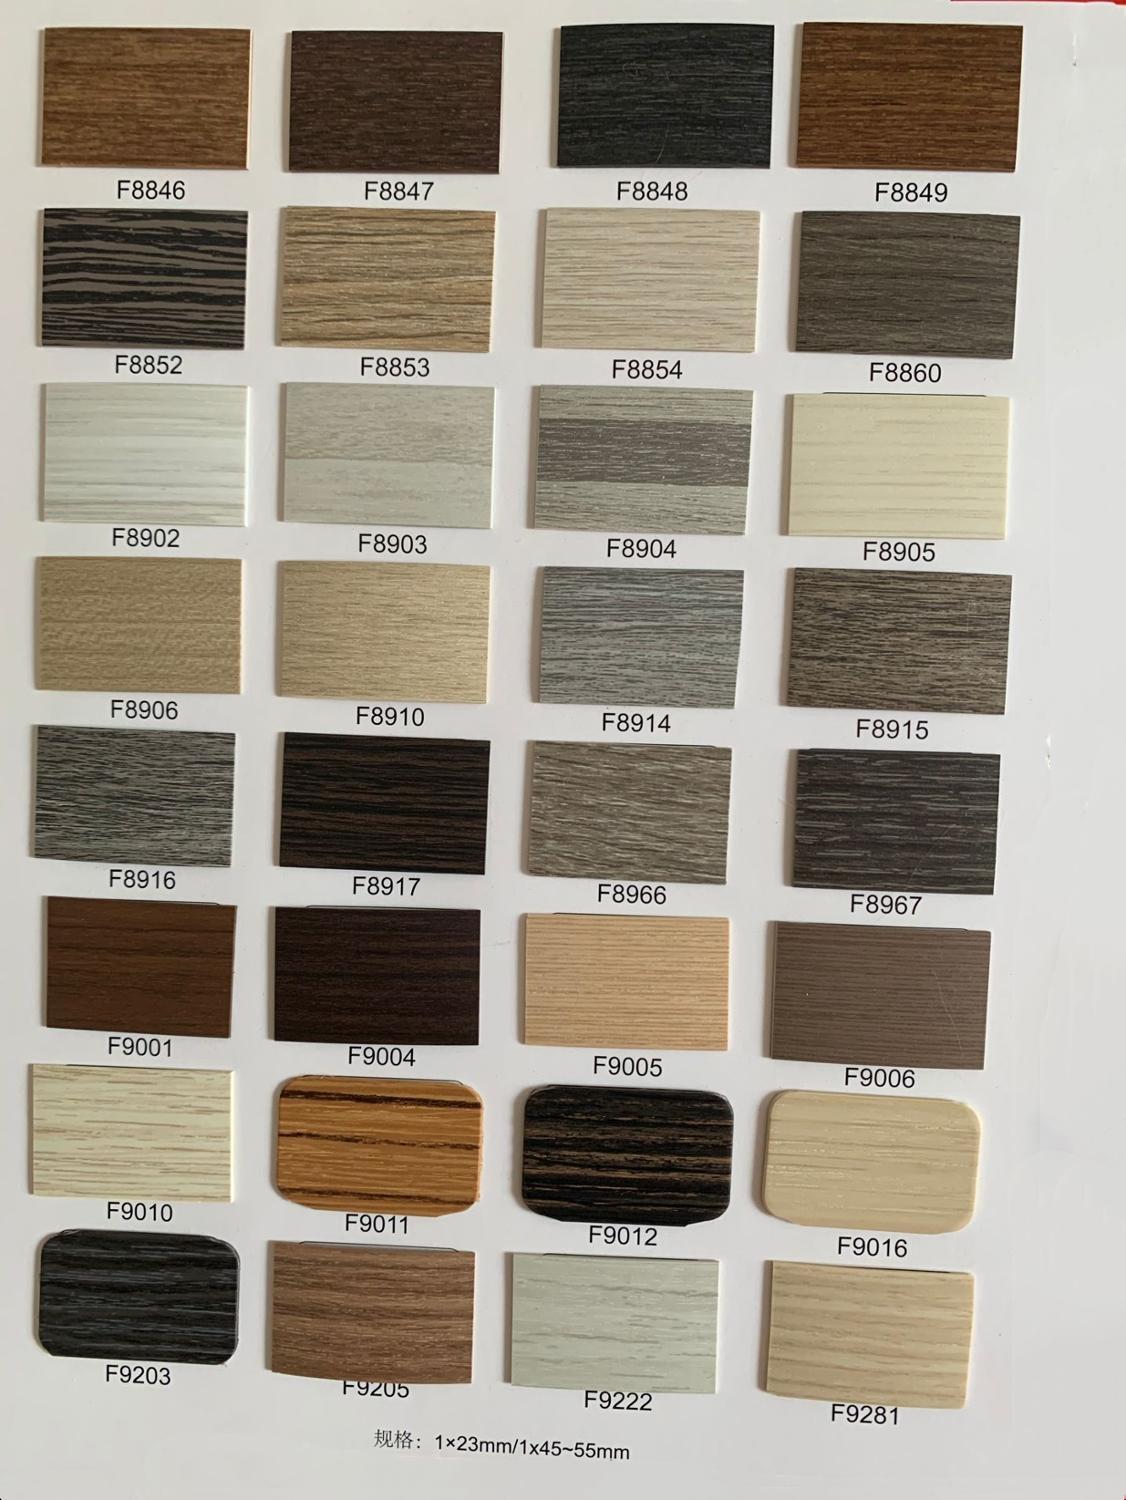 Flame Retardant Edge Banding Edgebands for Formica Board Panel 23mm 55mm x 5m PVC ABS Wood Grains